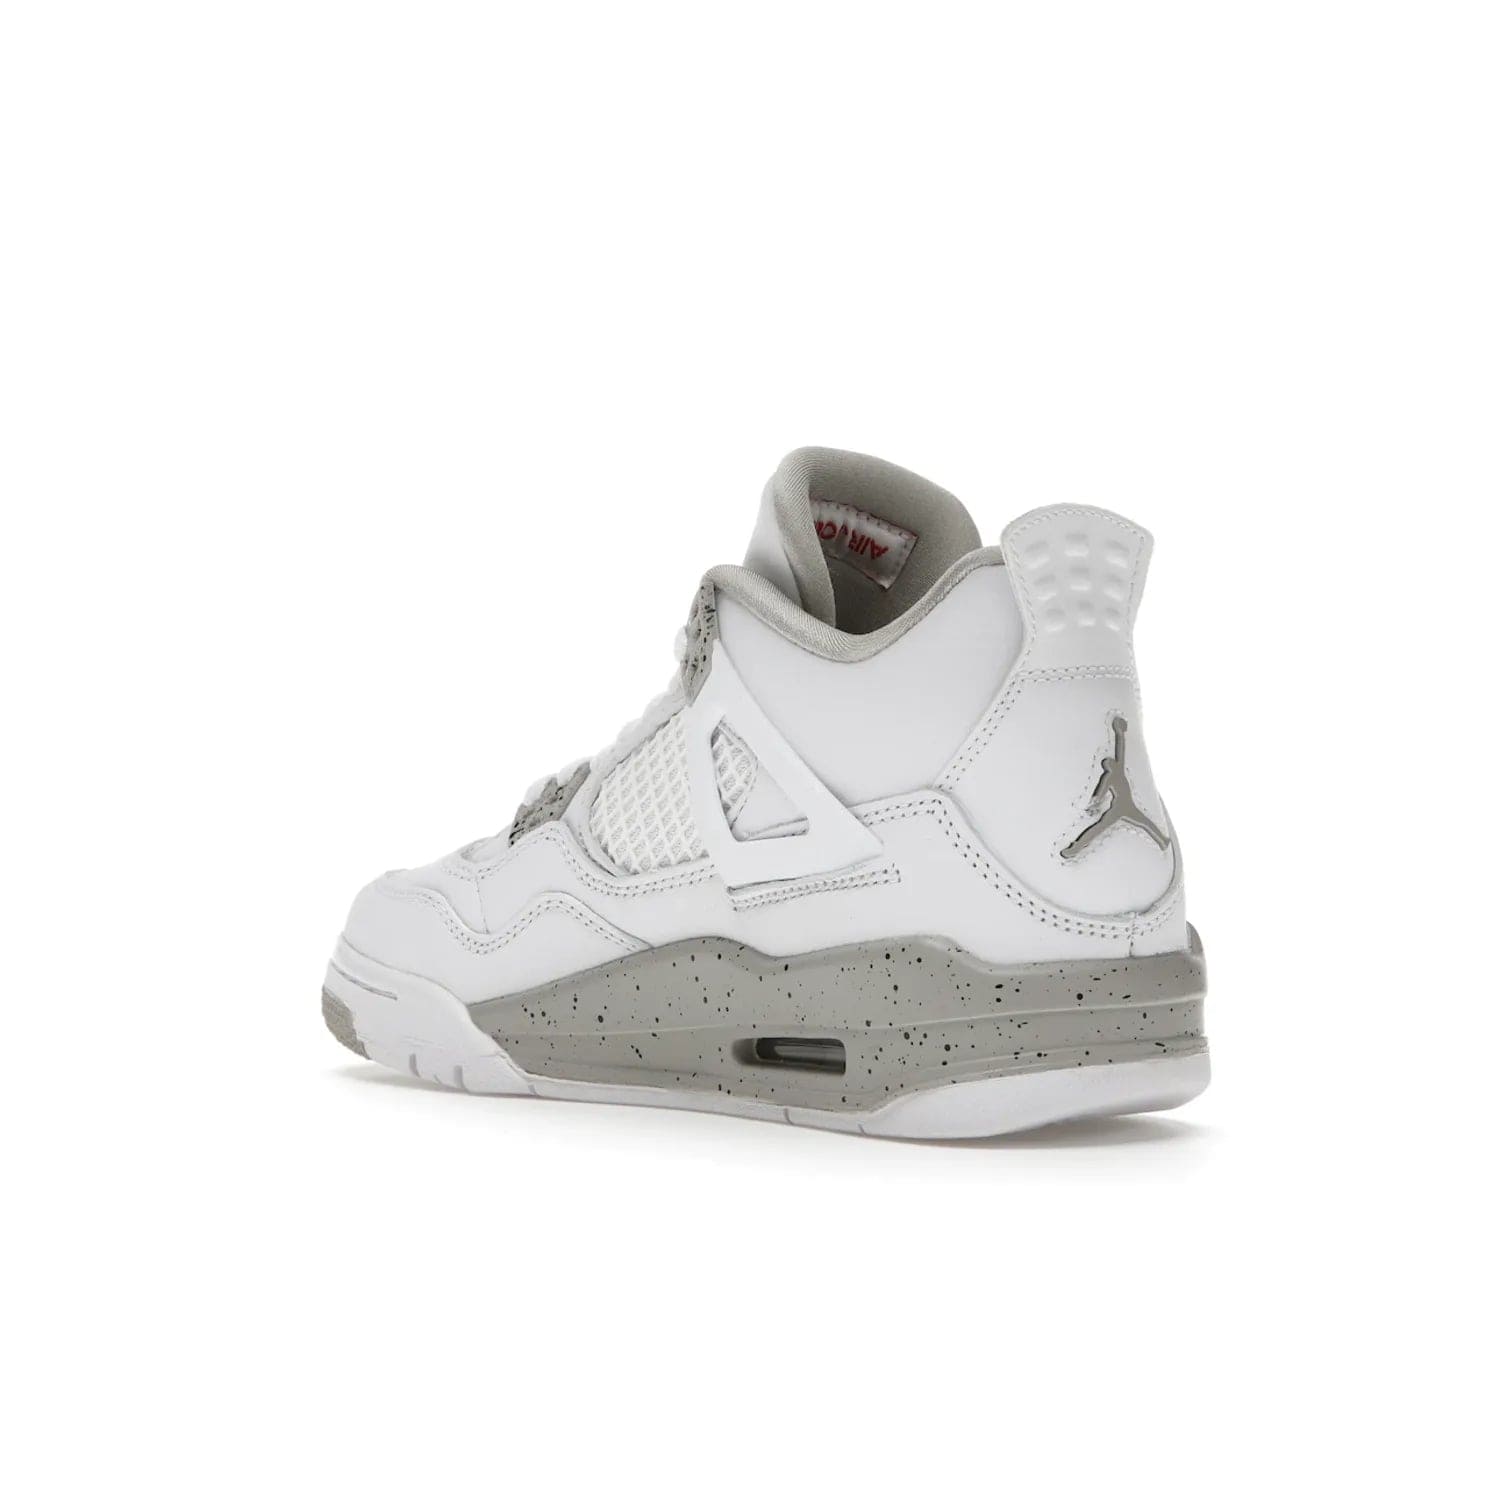 Jordan 4 Retro White Oreo (2021) (GS) - Image 24 - Only at www.BallersClubKickz.com - White Oreo Air Jordan 4 Retro 2021 GS - Iconic sneaker silhouette with white canvas upper, Tech Grey detailing, and Fire Red accents. Available July 2021.